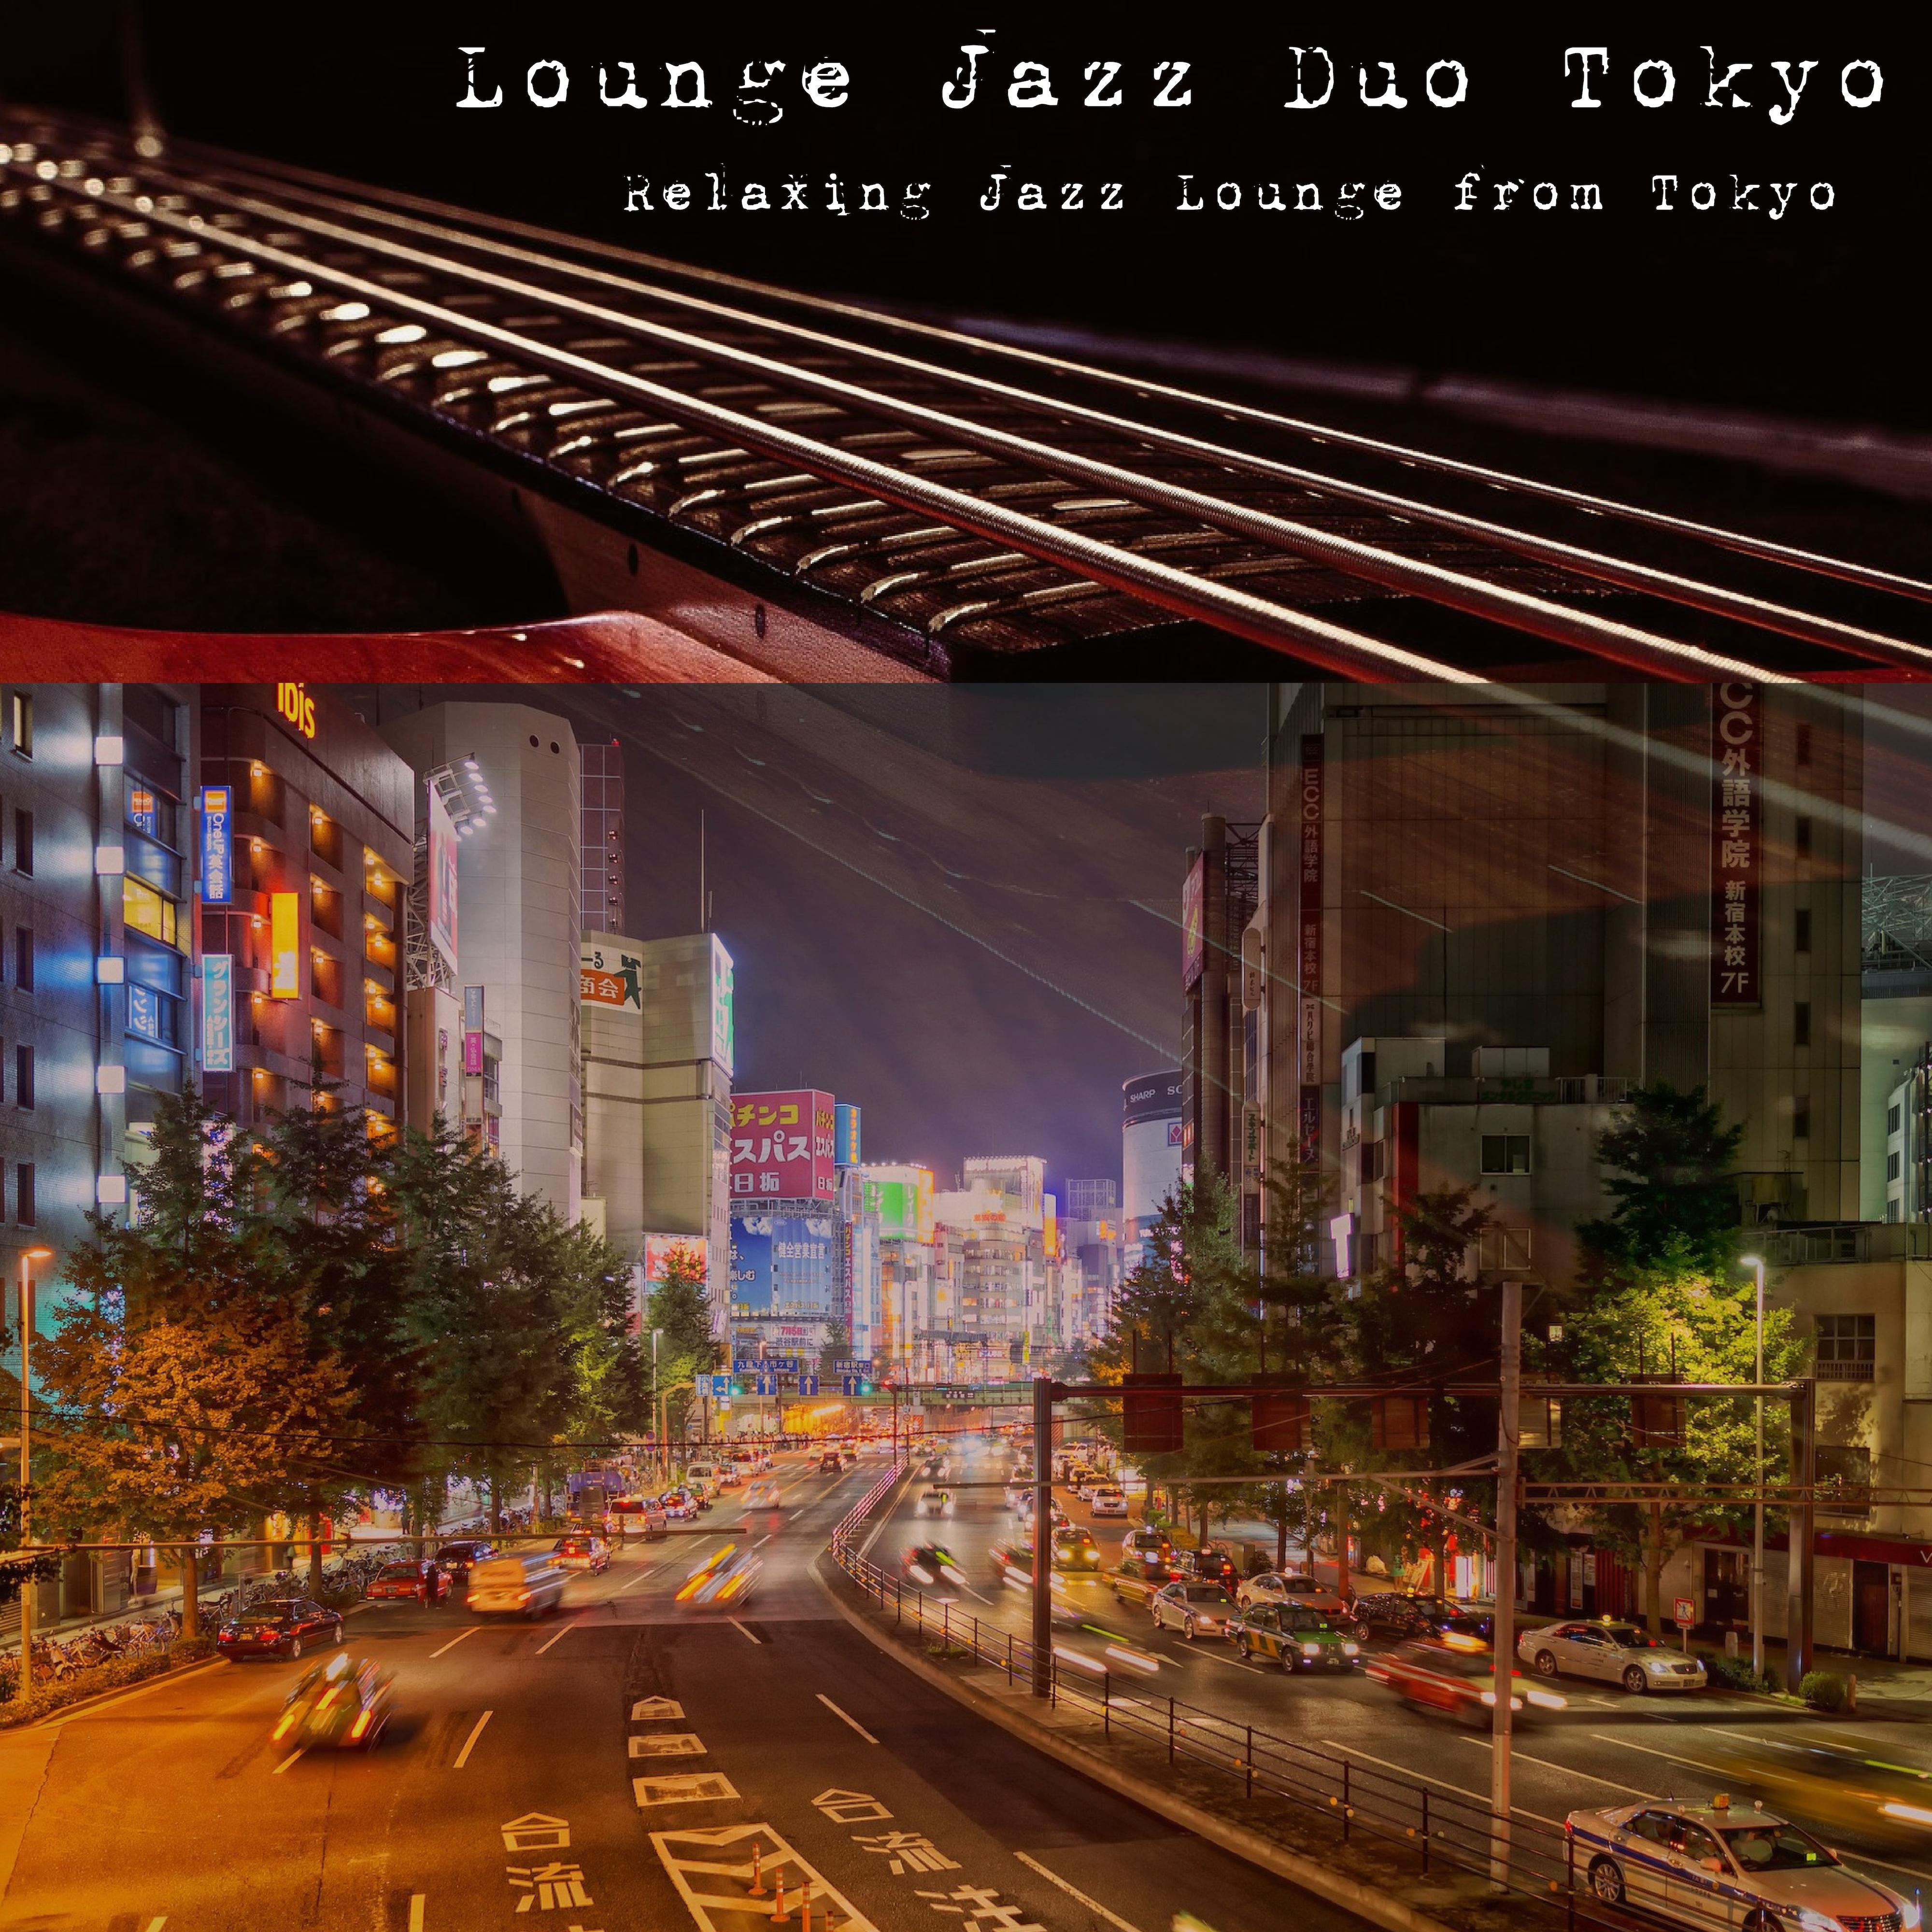 Relaxing Jazz Lounge from Tokyo